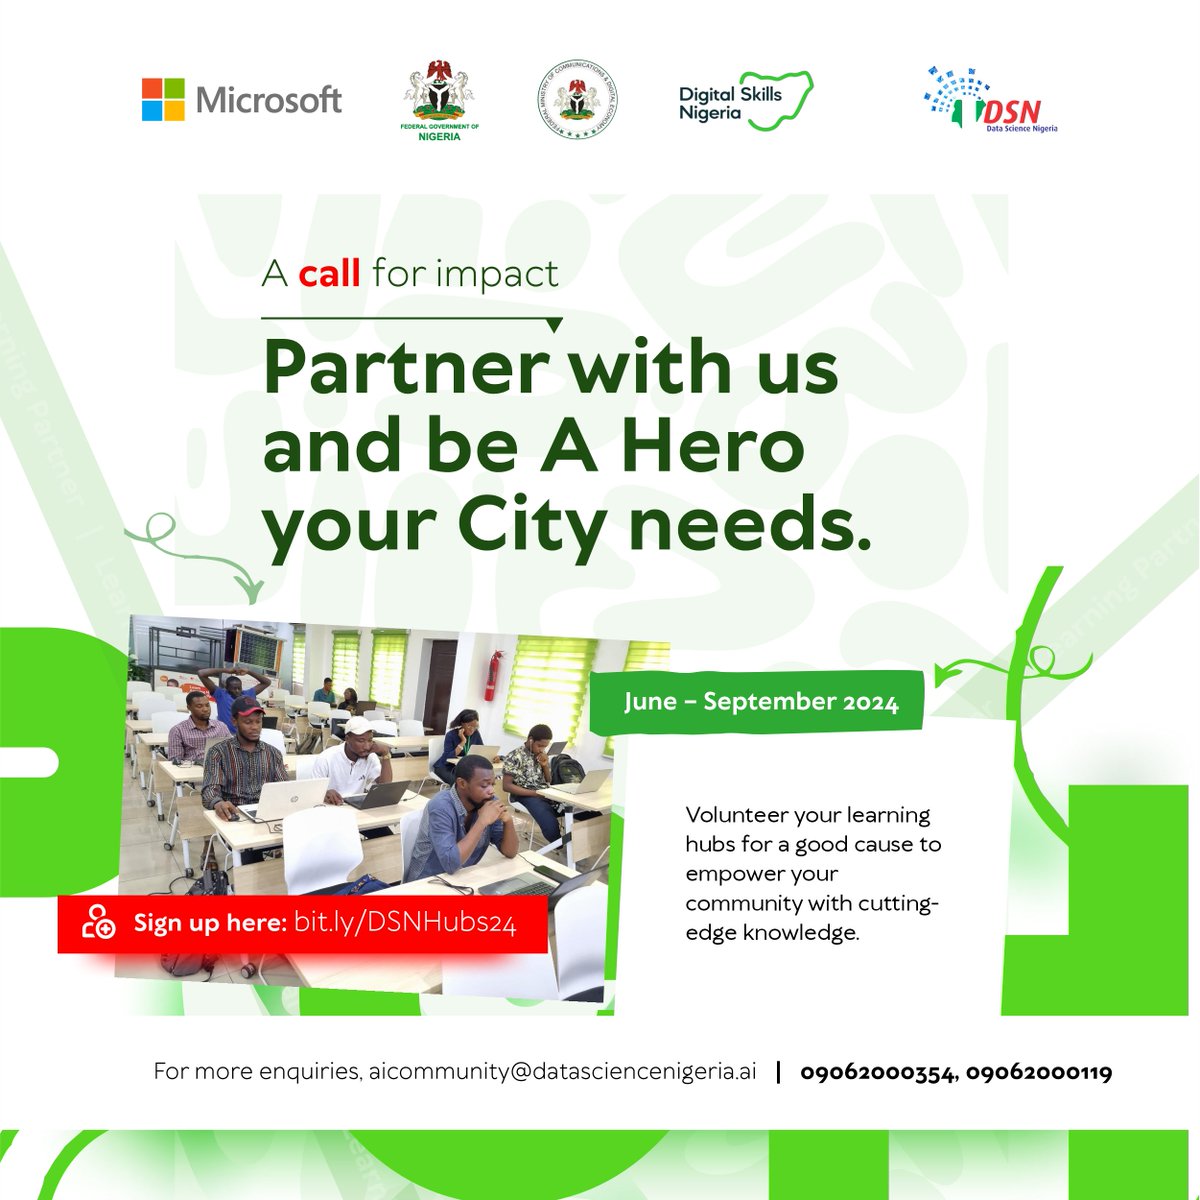 Do you have a digitally equipped learning facility for 50+ learners? Join us in making impact in your city. Be part of the success stories of learners in your city. Volunteer your space & bring cutting-edge digital skills to your community. Click here>bit.ly/DSNHubs24